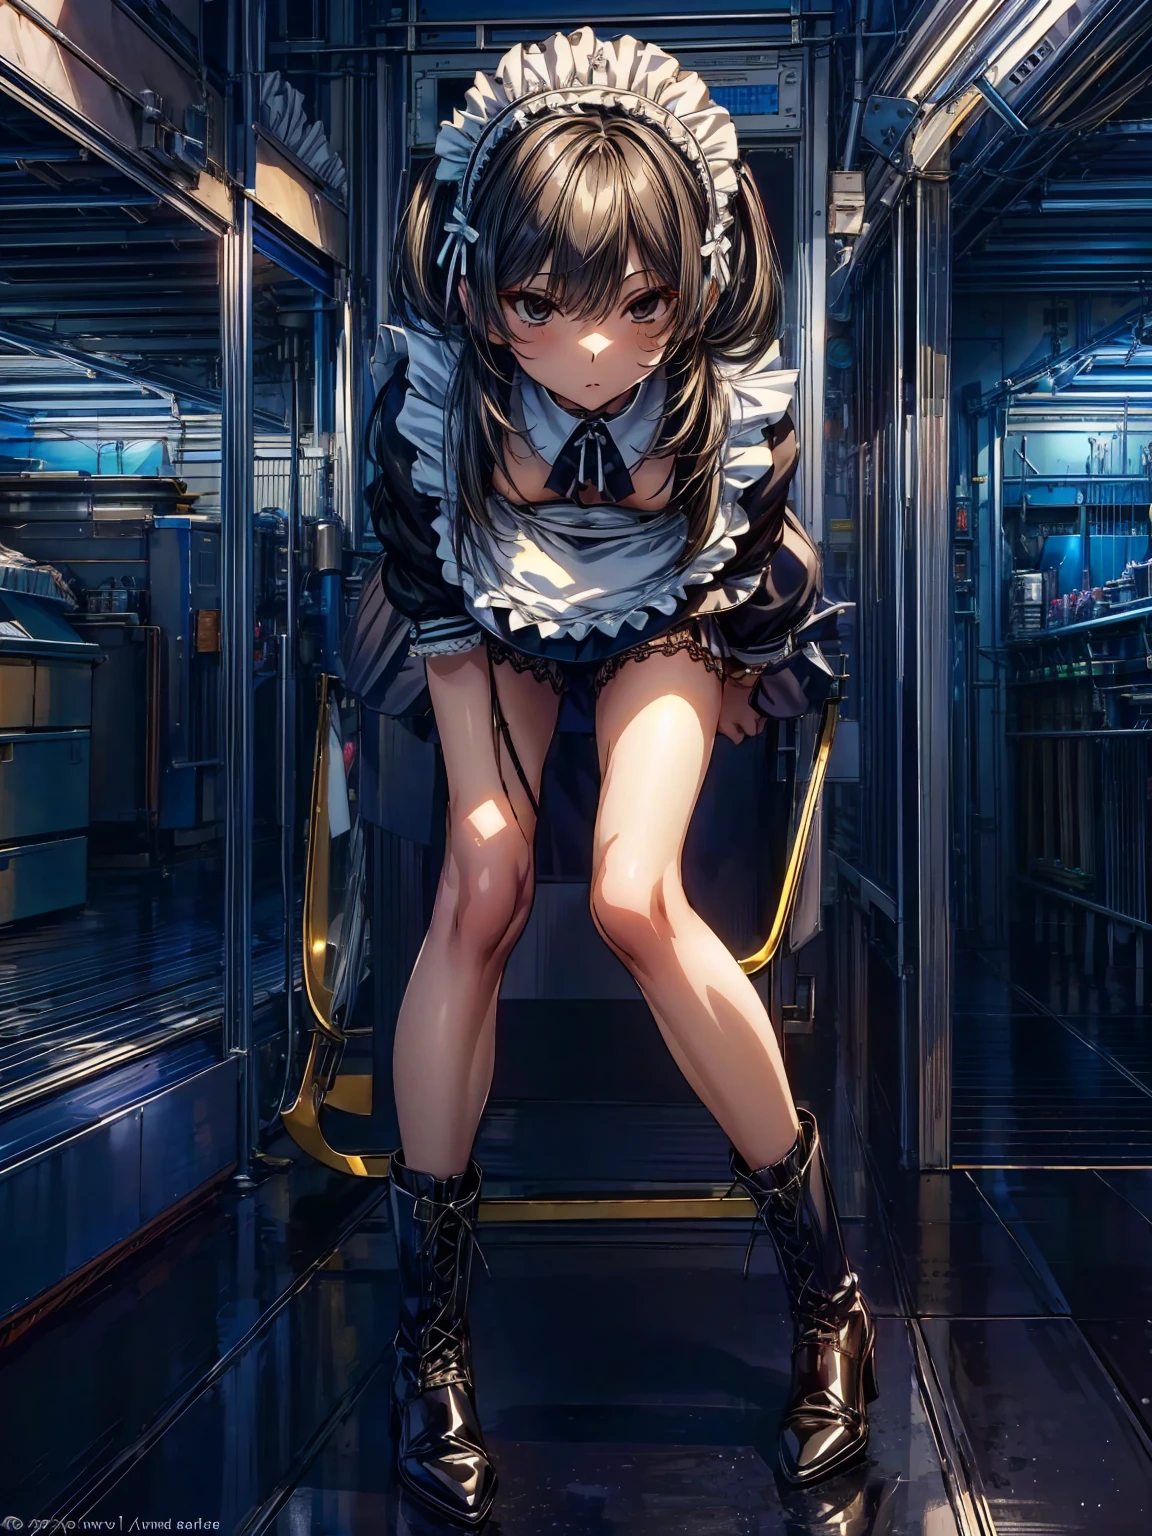 (Perfect Anatomy:1.2, Highest quality),(Maid leotard details:2.0),One Girl,alone,Long Hair:1.5, (Short sleeve, Thighs,Maid Cufflinks),,Hypno Lola, Hollow Eyes,(High heel lace-up boots:1.4), (Without skirt:3.0),Dark aura,Leotrad,,love for viewers,Look down,(at a research facility:1.8)